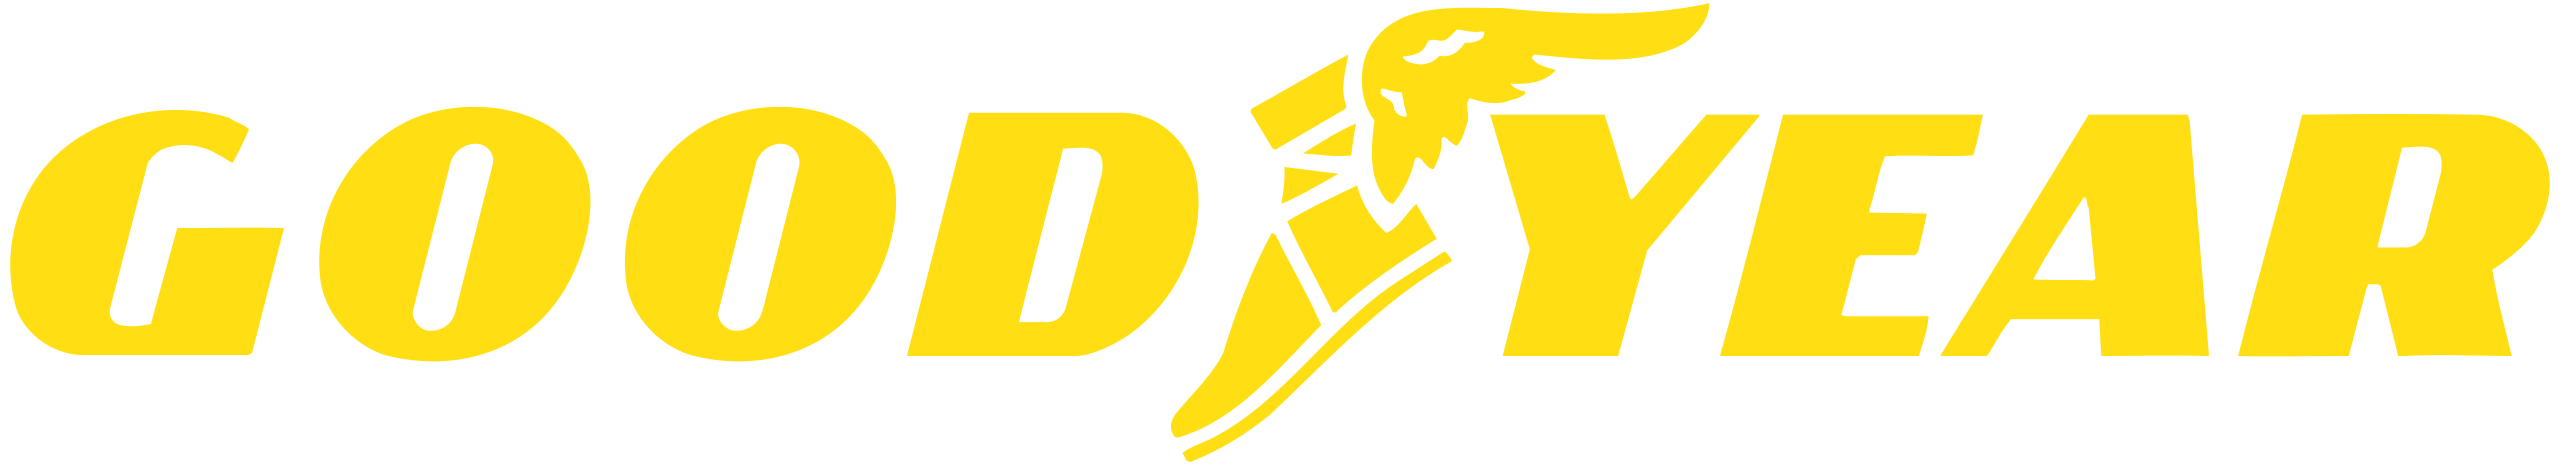 a yellow and black logo for a movie.